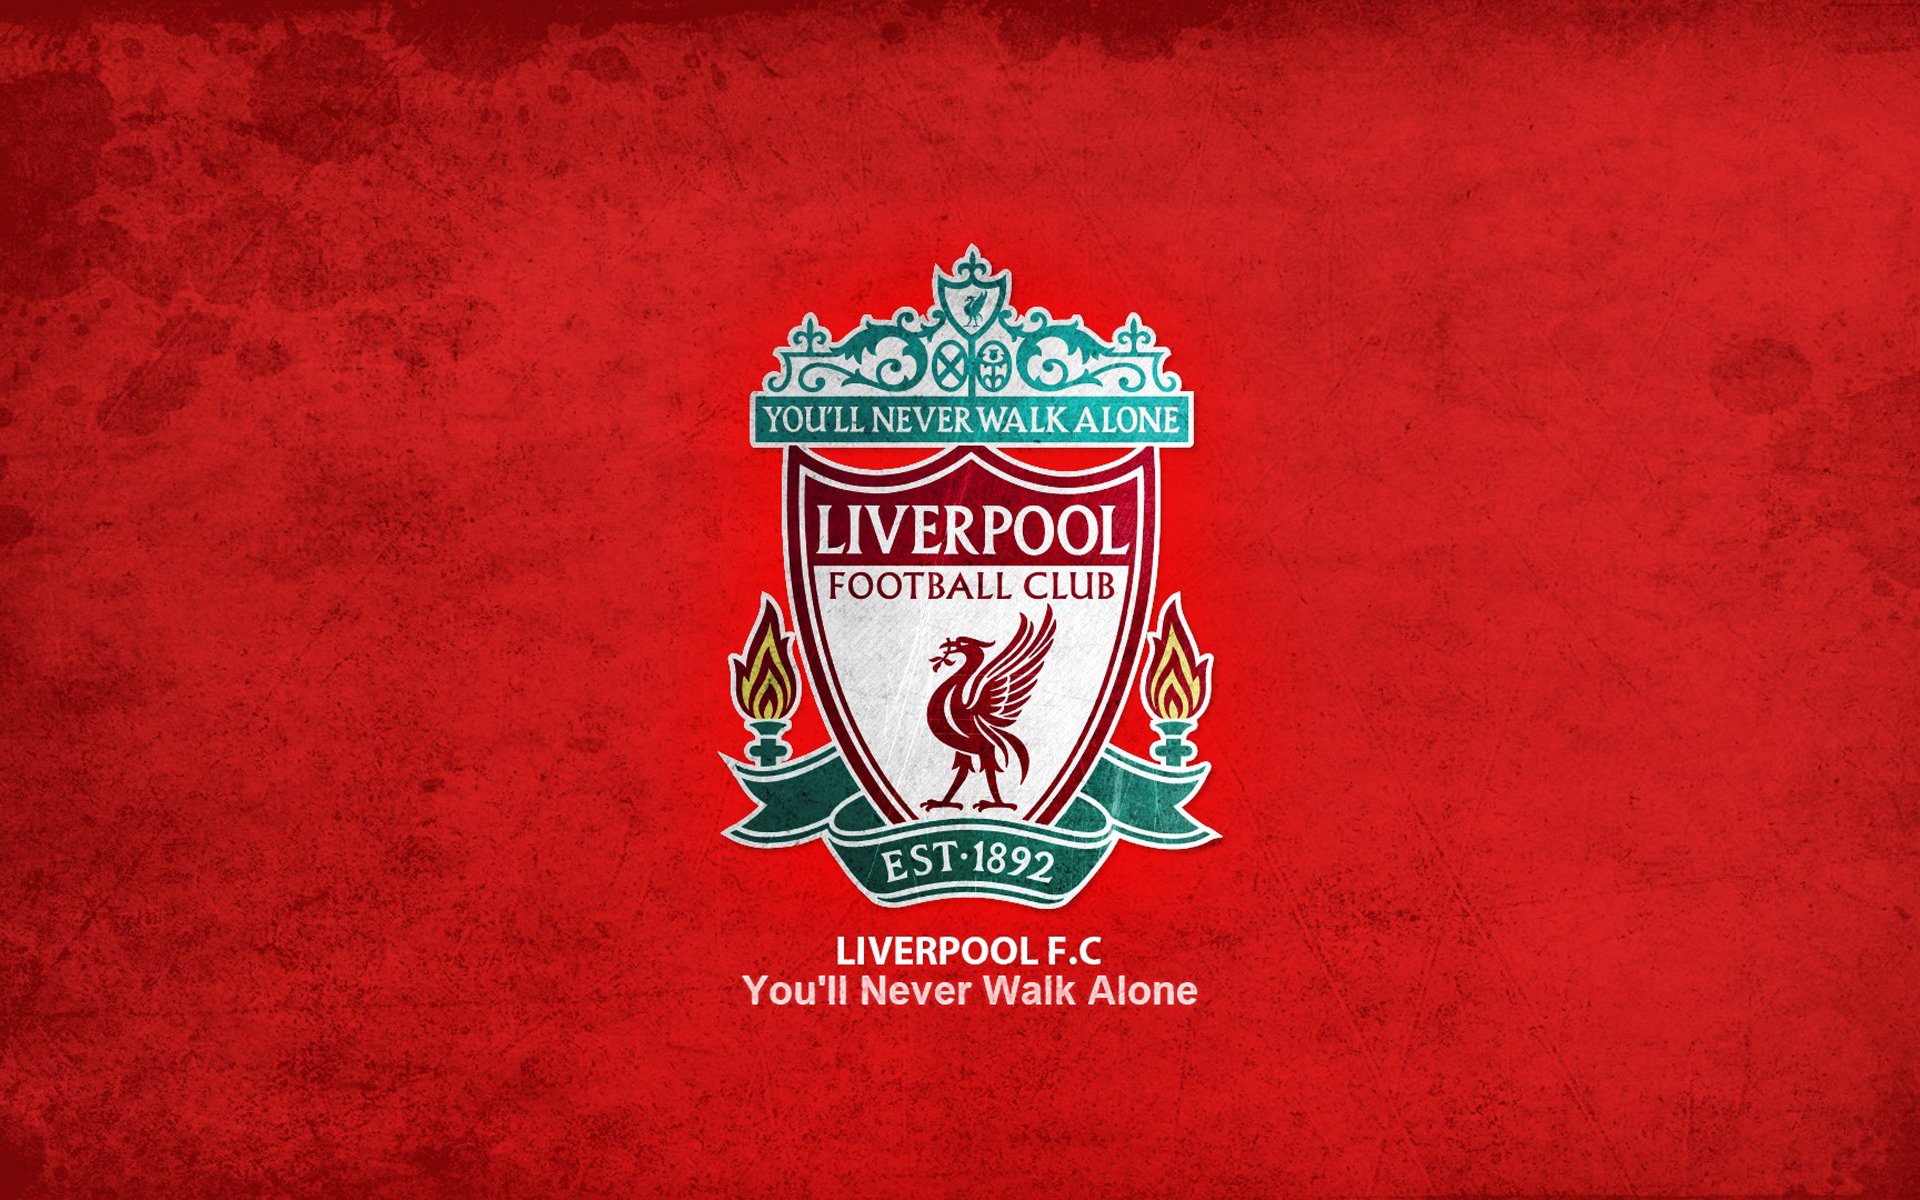 Liverpool Football Club wallpapers and images   wallpapers